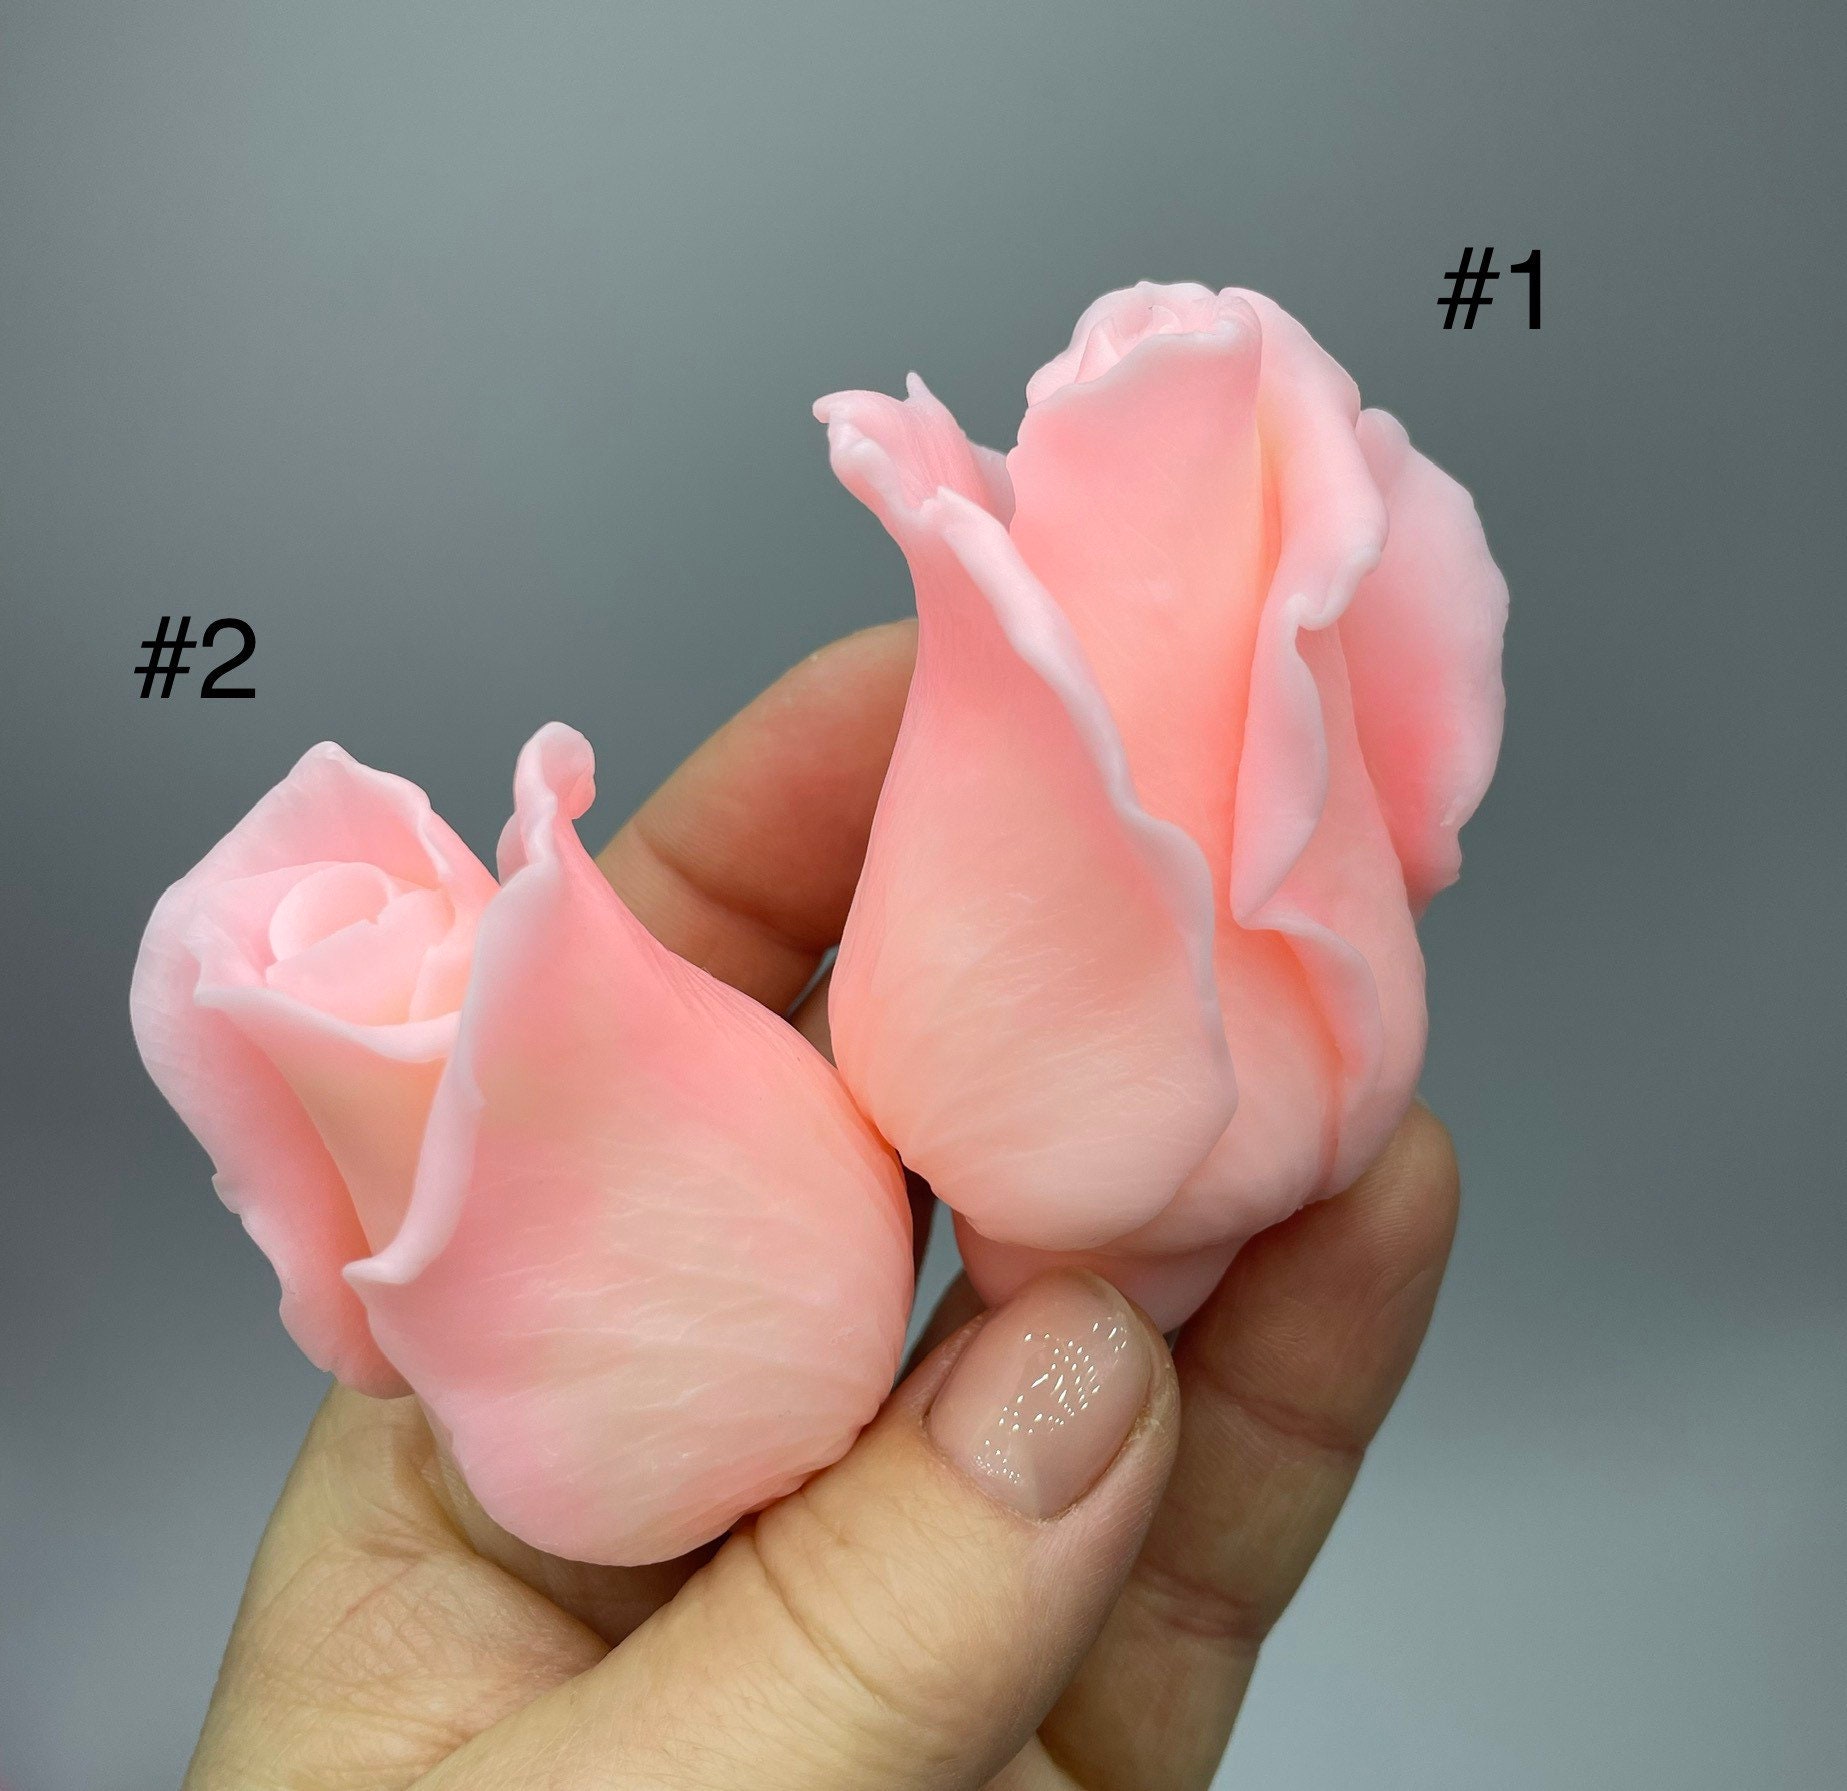 Big Pretty 3D Rose Flowers Mold Lifelike Rose Floral Soap Molds Silicone  Candle Epoxy Resin Crafts Mould Bouquet Making Moulds